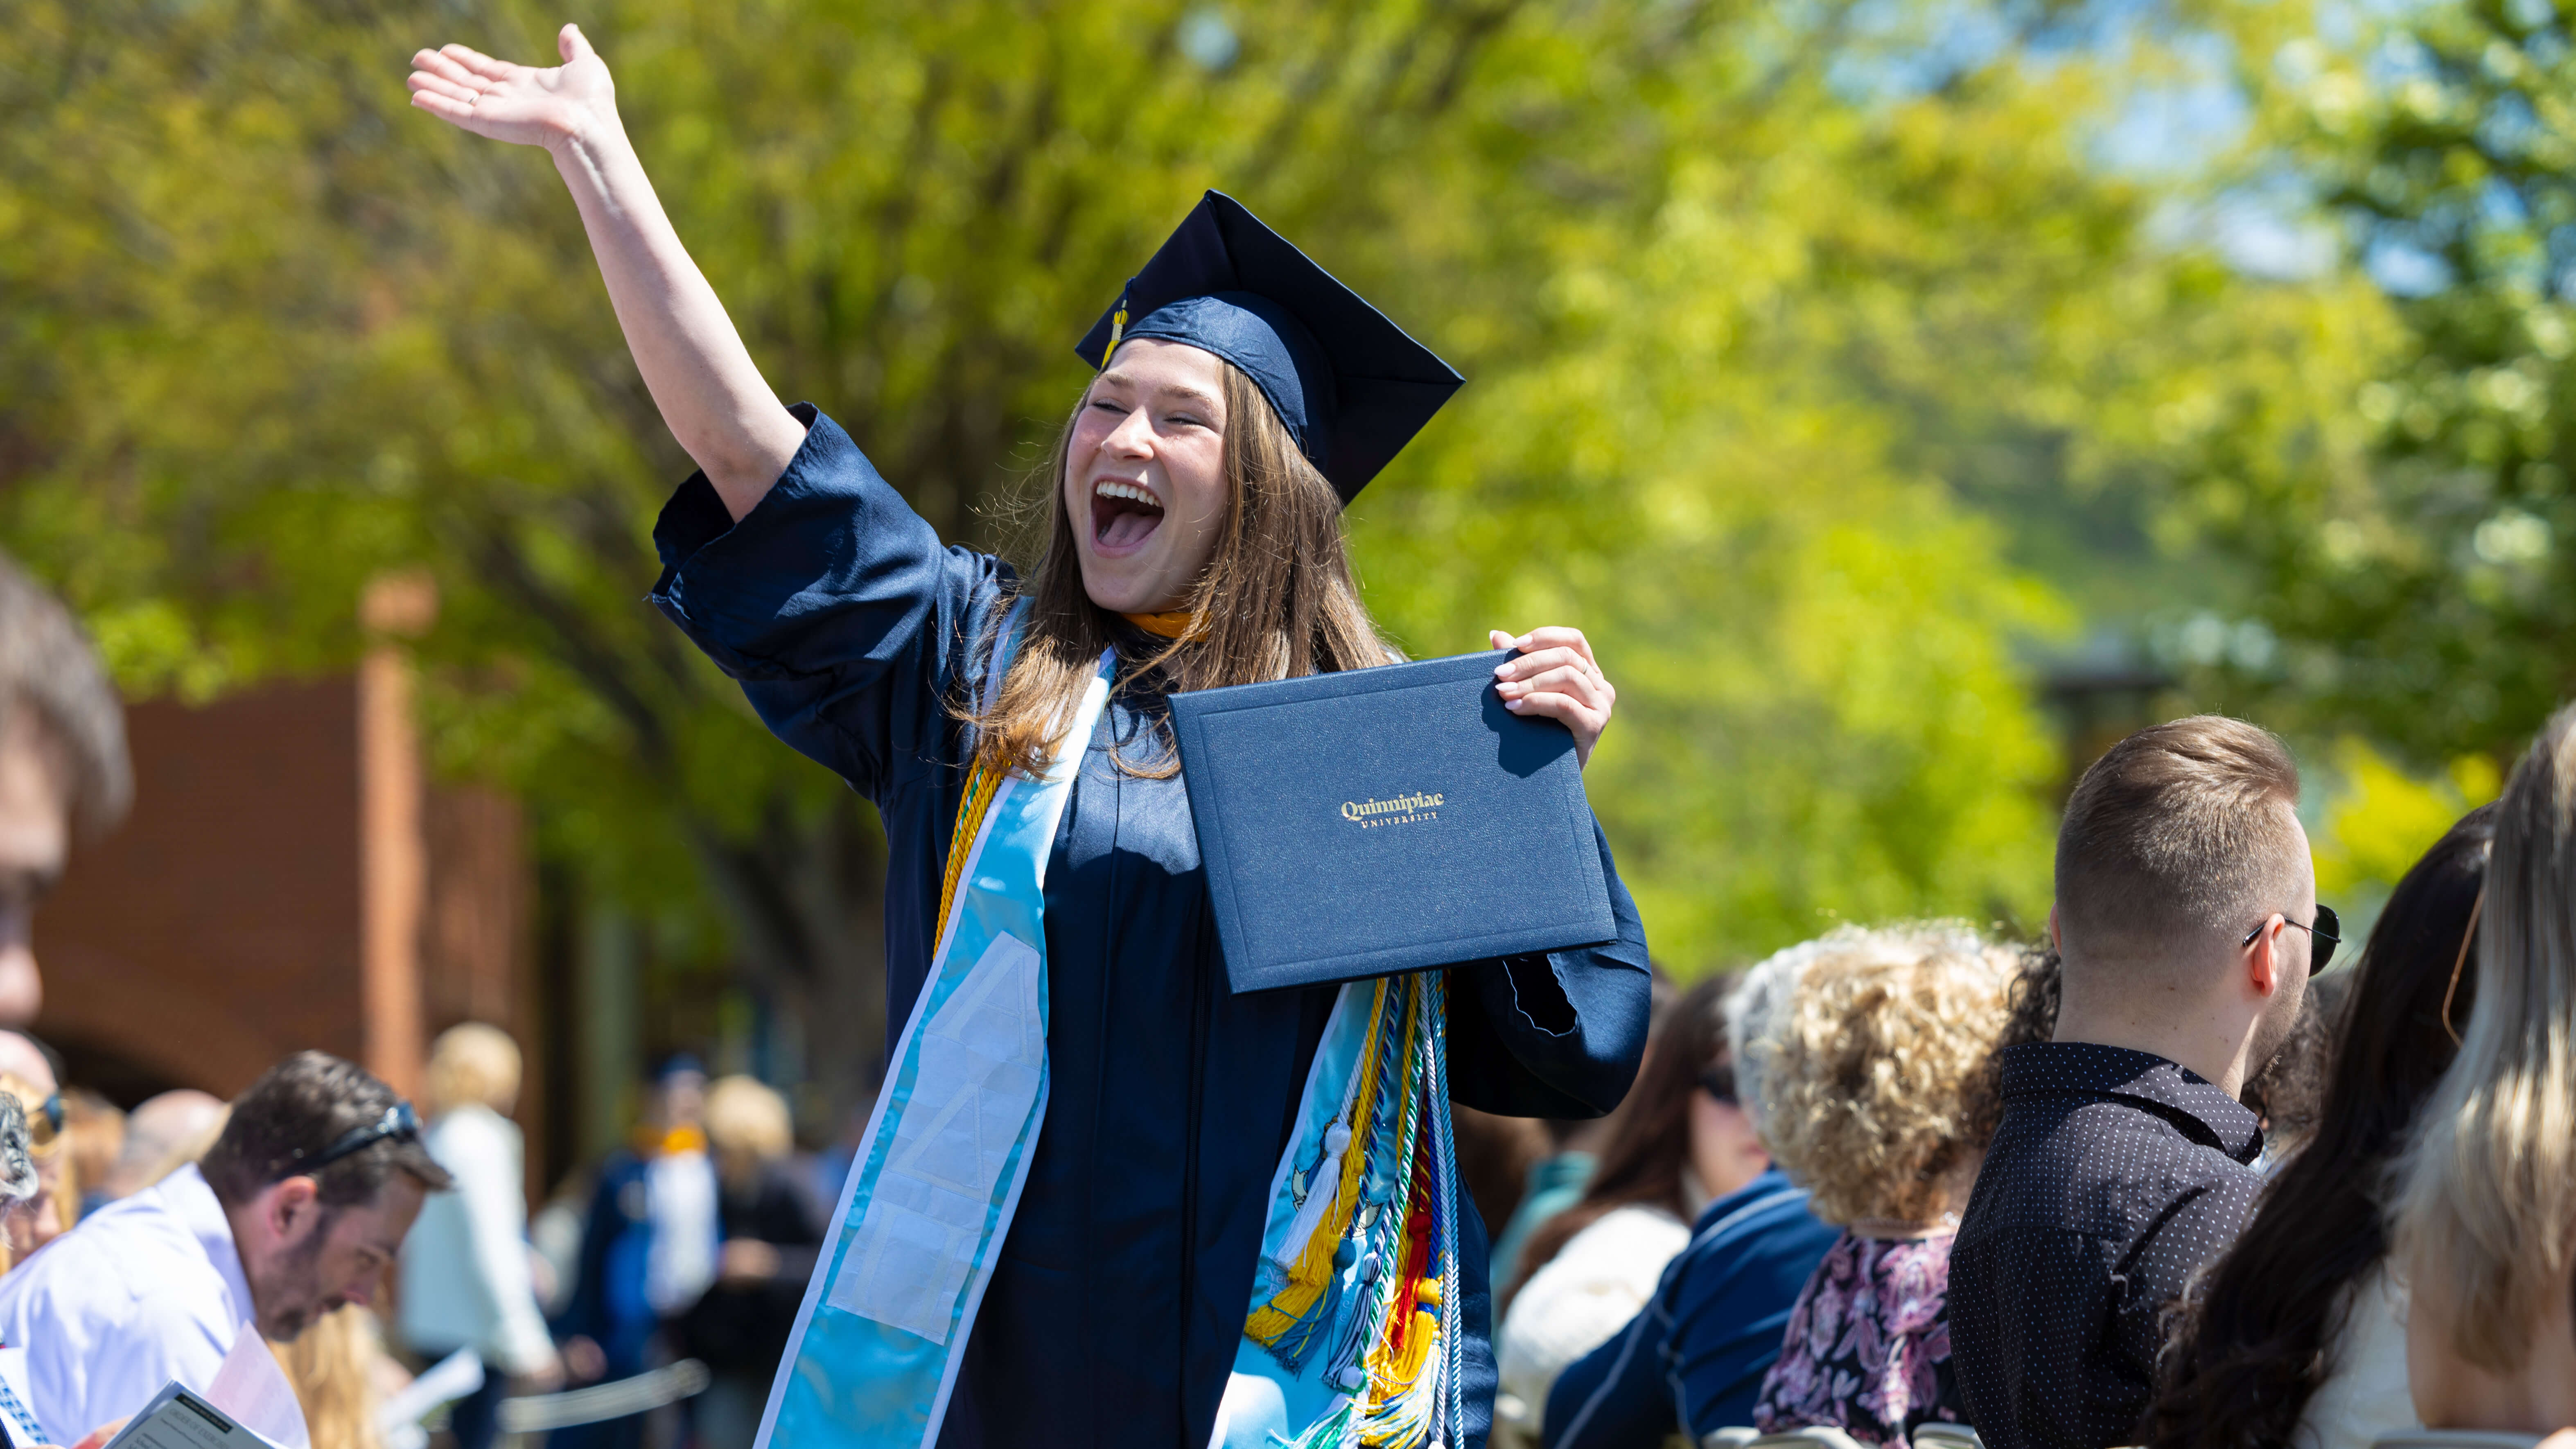 Student waves and smiles with degree